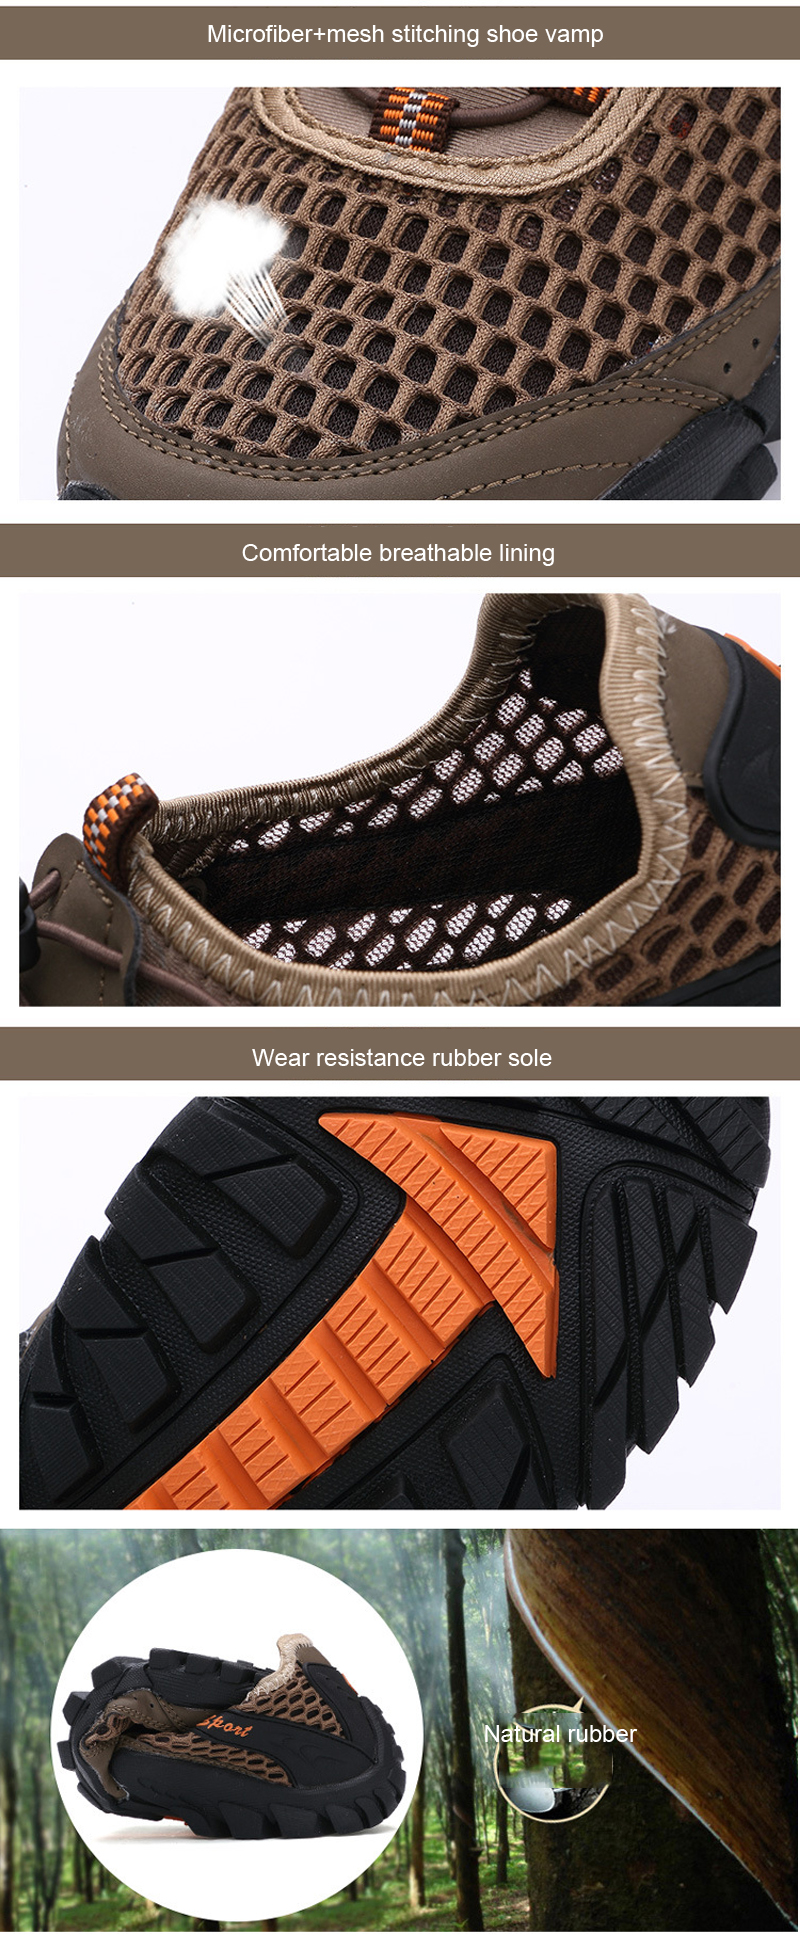 Q923-Men-Outdoor-Breathable-Summer-Trekking-Water-Shoes--Climbing-Hiking-Shoes-Sneakers-1323873